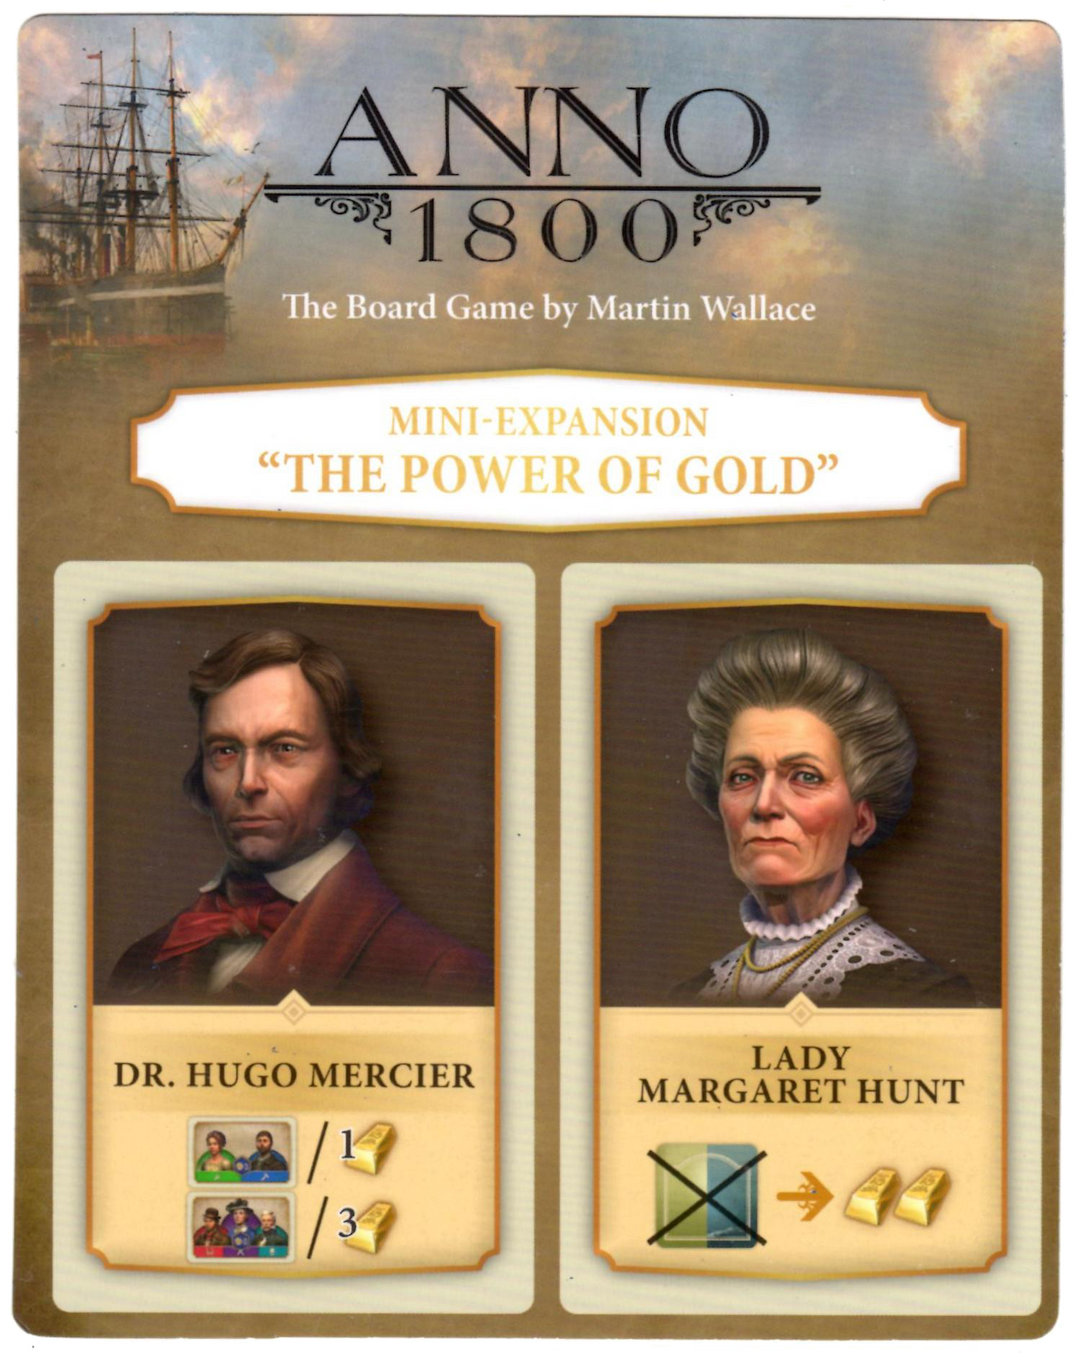 The Power of Gold promo for use with the board game Anno 1800, featuring the names of the game and promo at the top and two portraits, one of a clean-shaven caucasian man and an older woman.